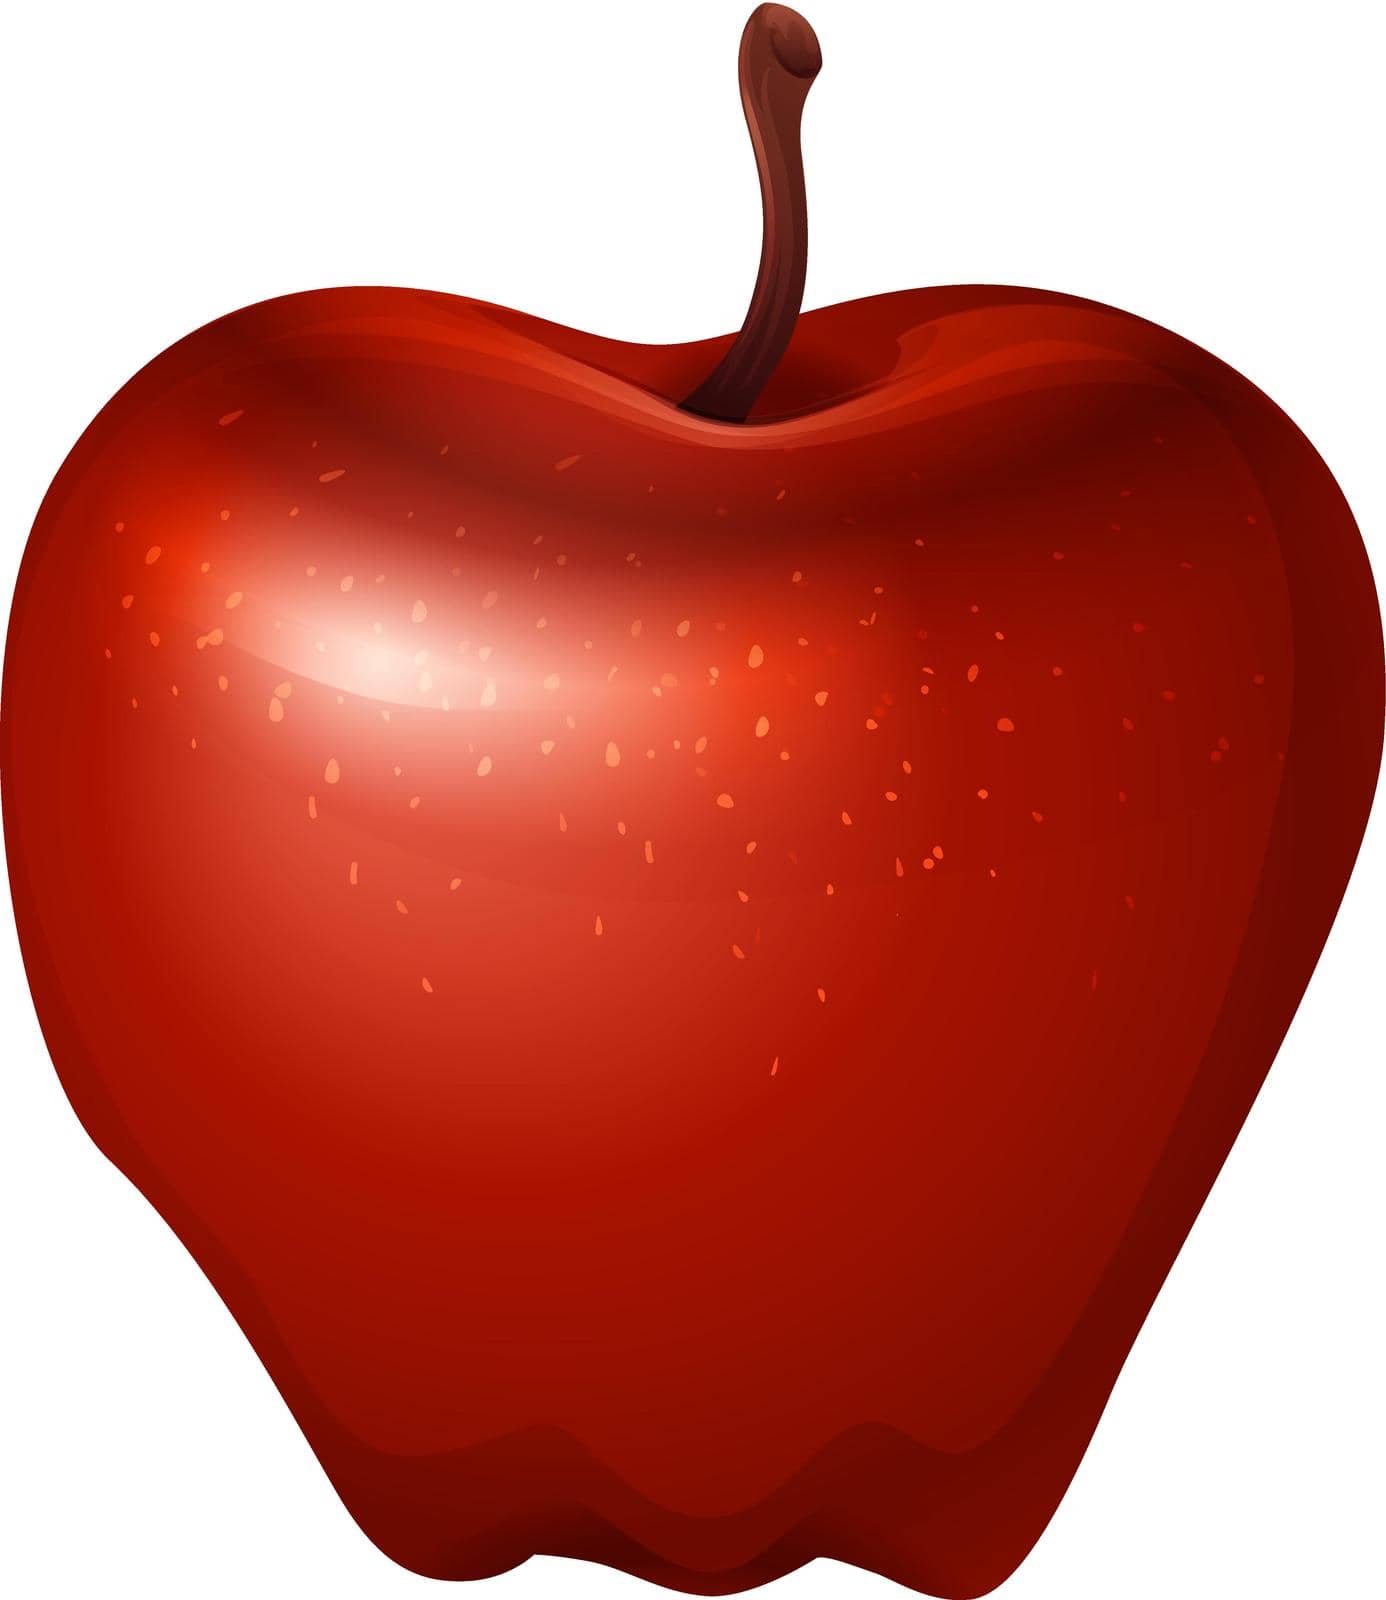 A red crunchy apple by iimages